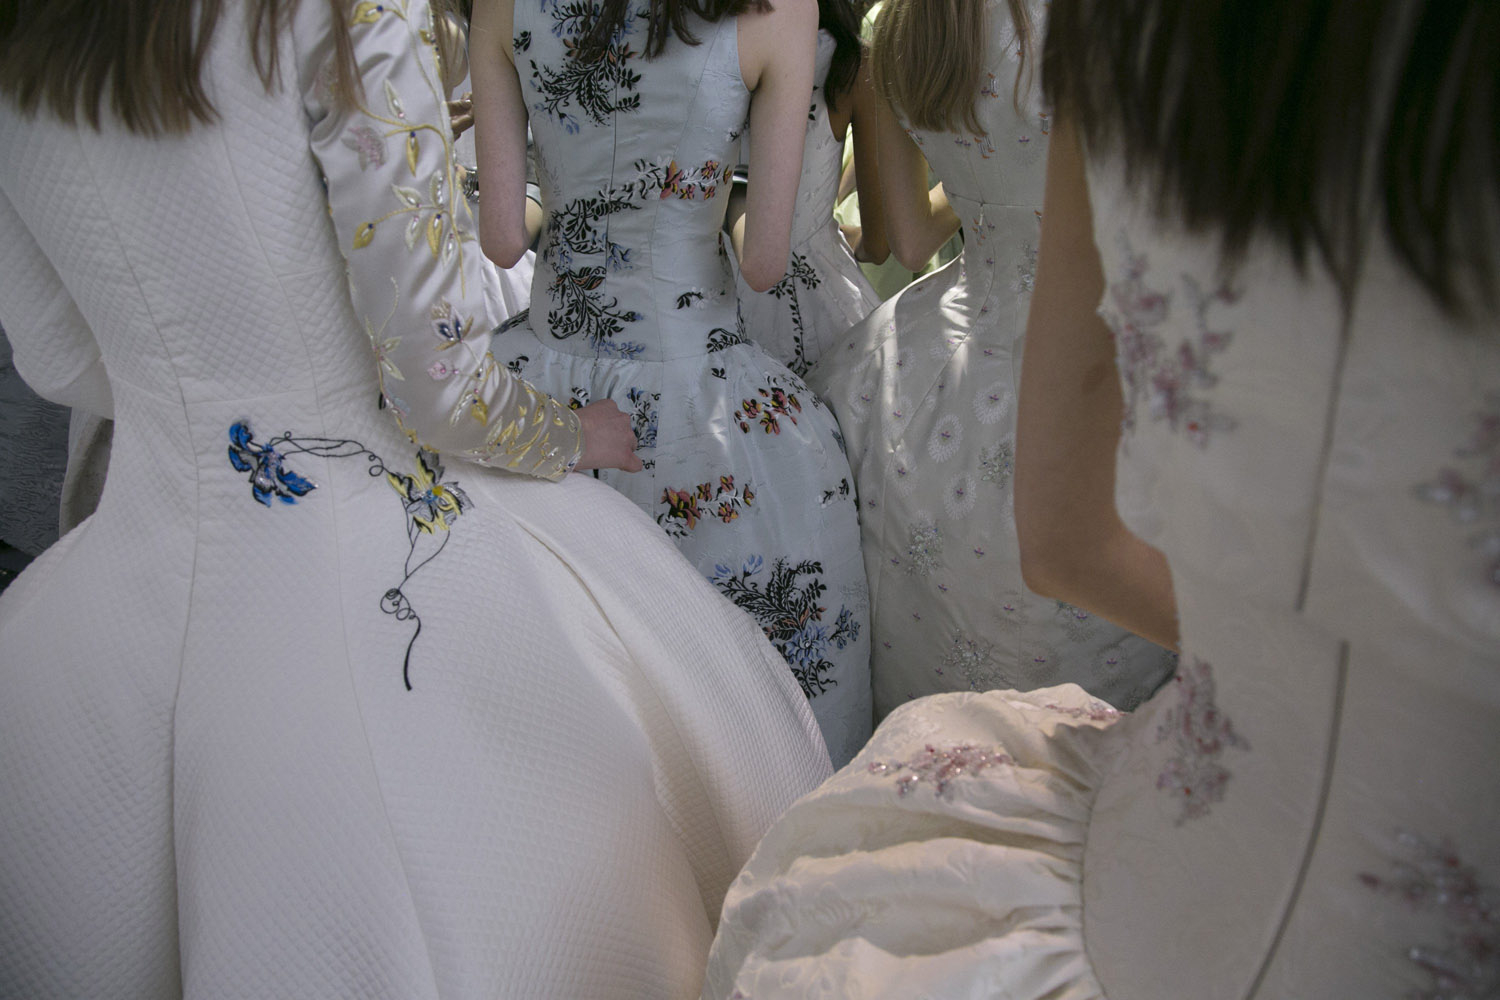 Dresses at the Christian Dior Fashion Show in Paris.